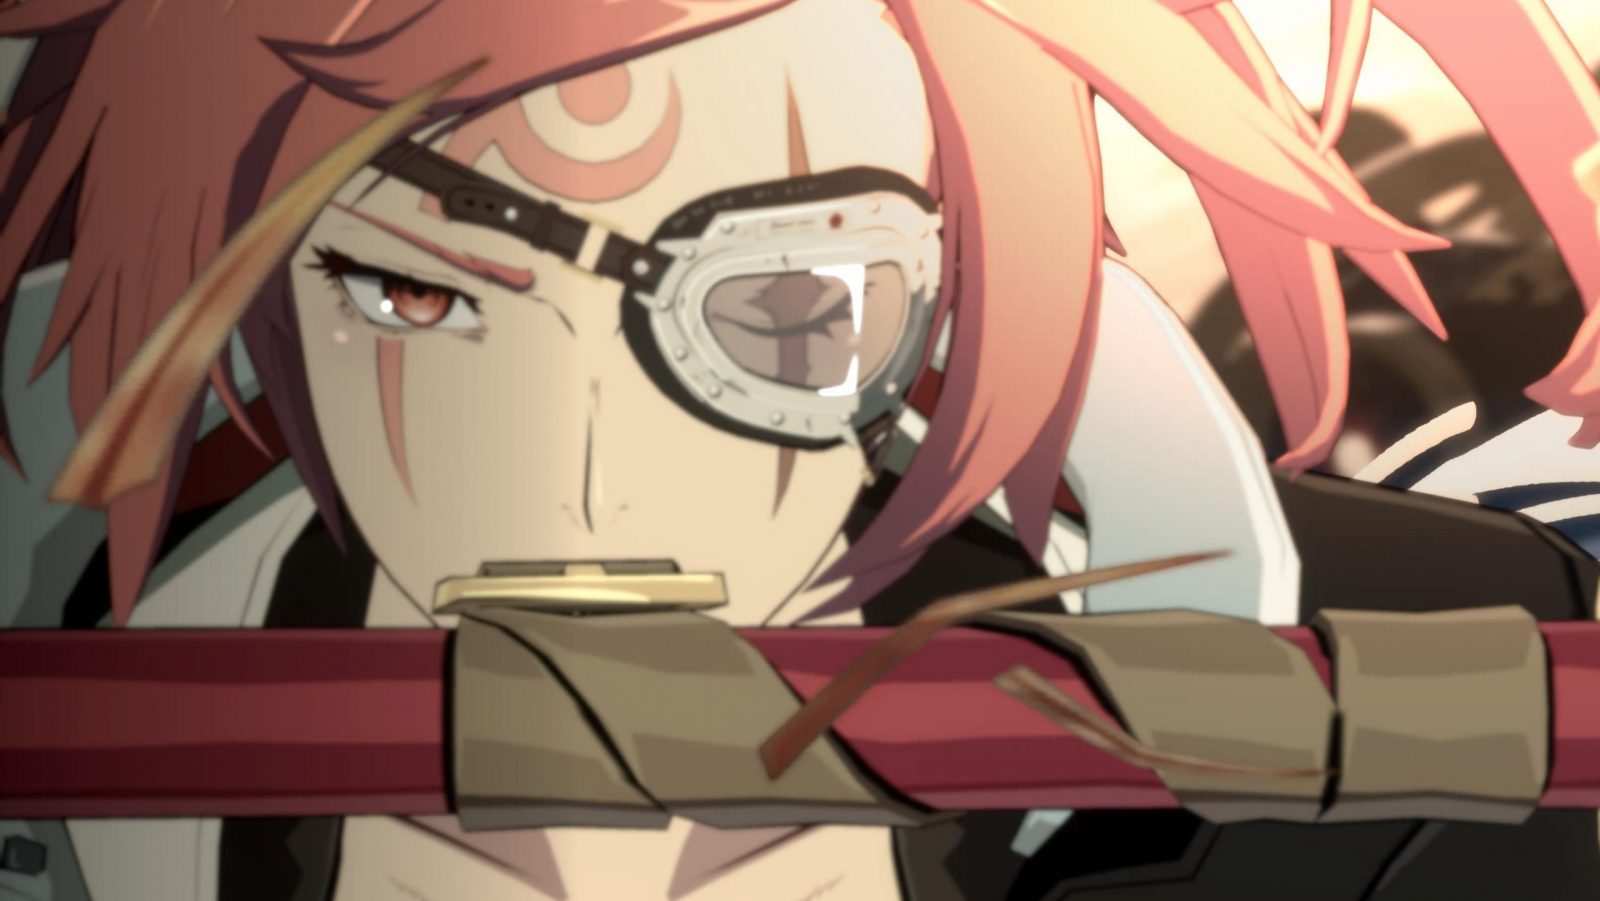 Guilty Gear Strive's new DLC character is a trans icon with a yoyo